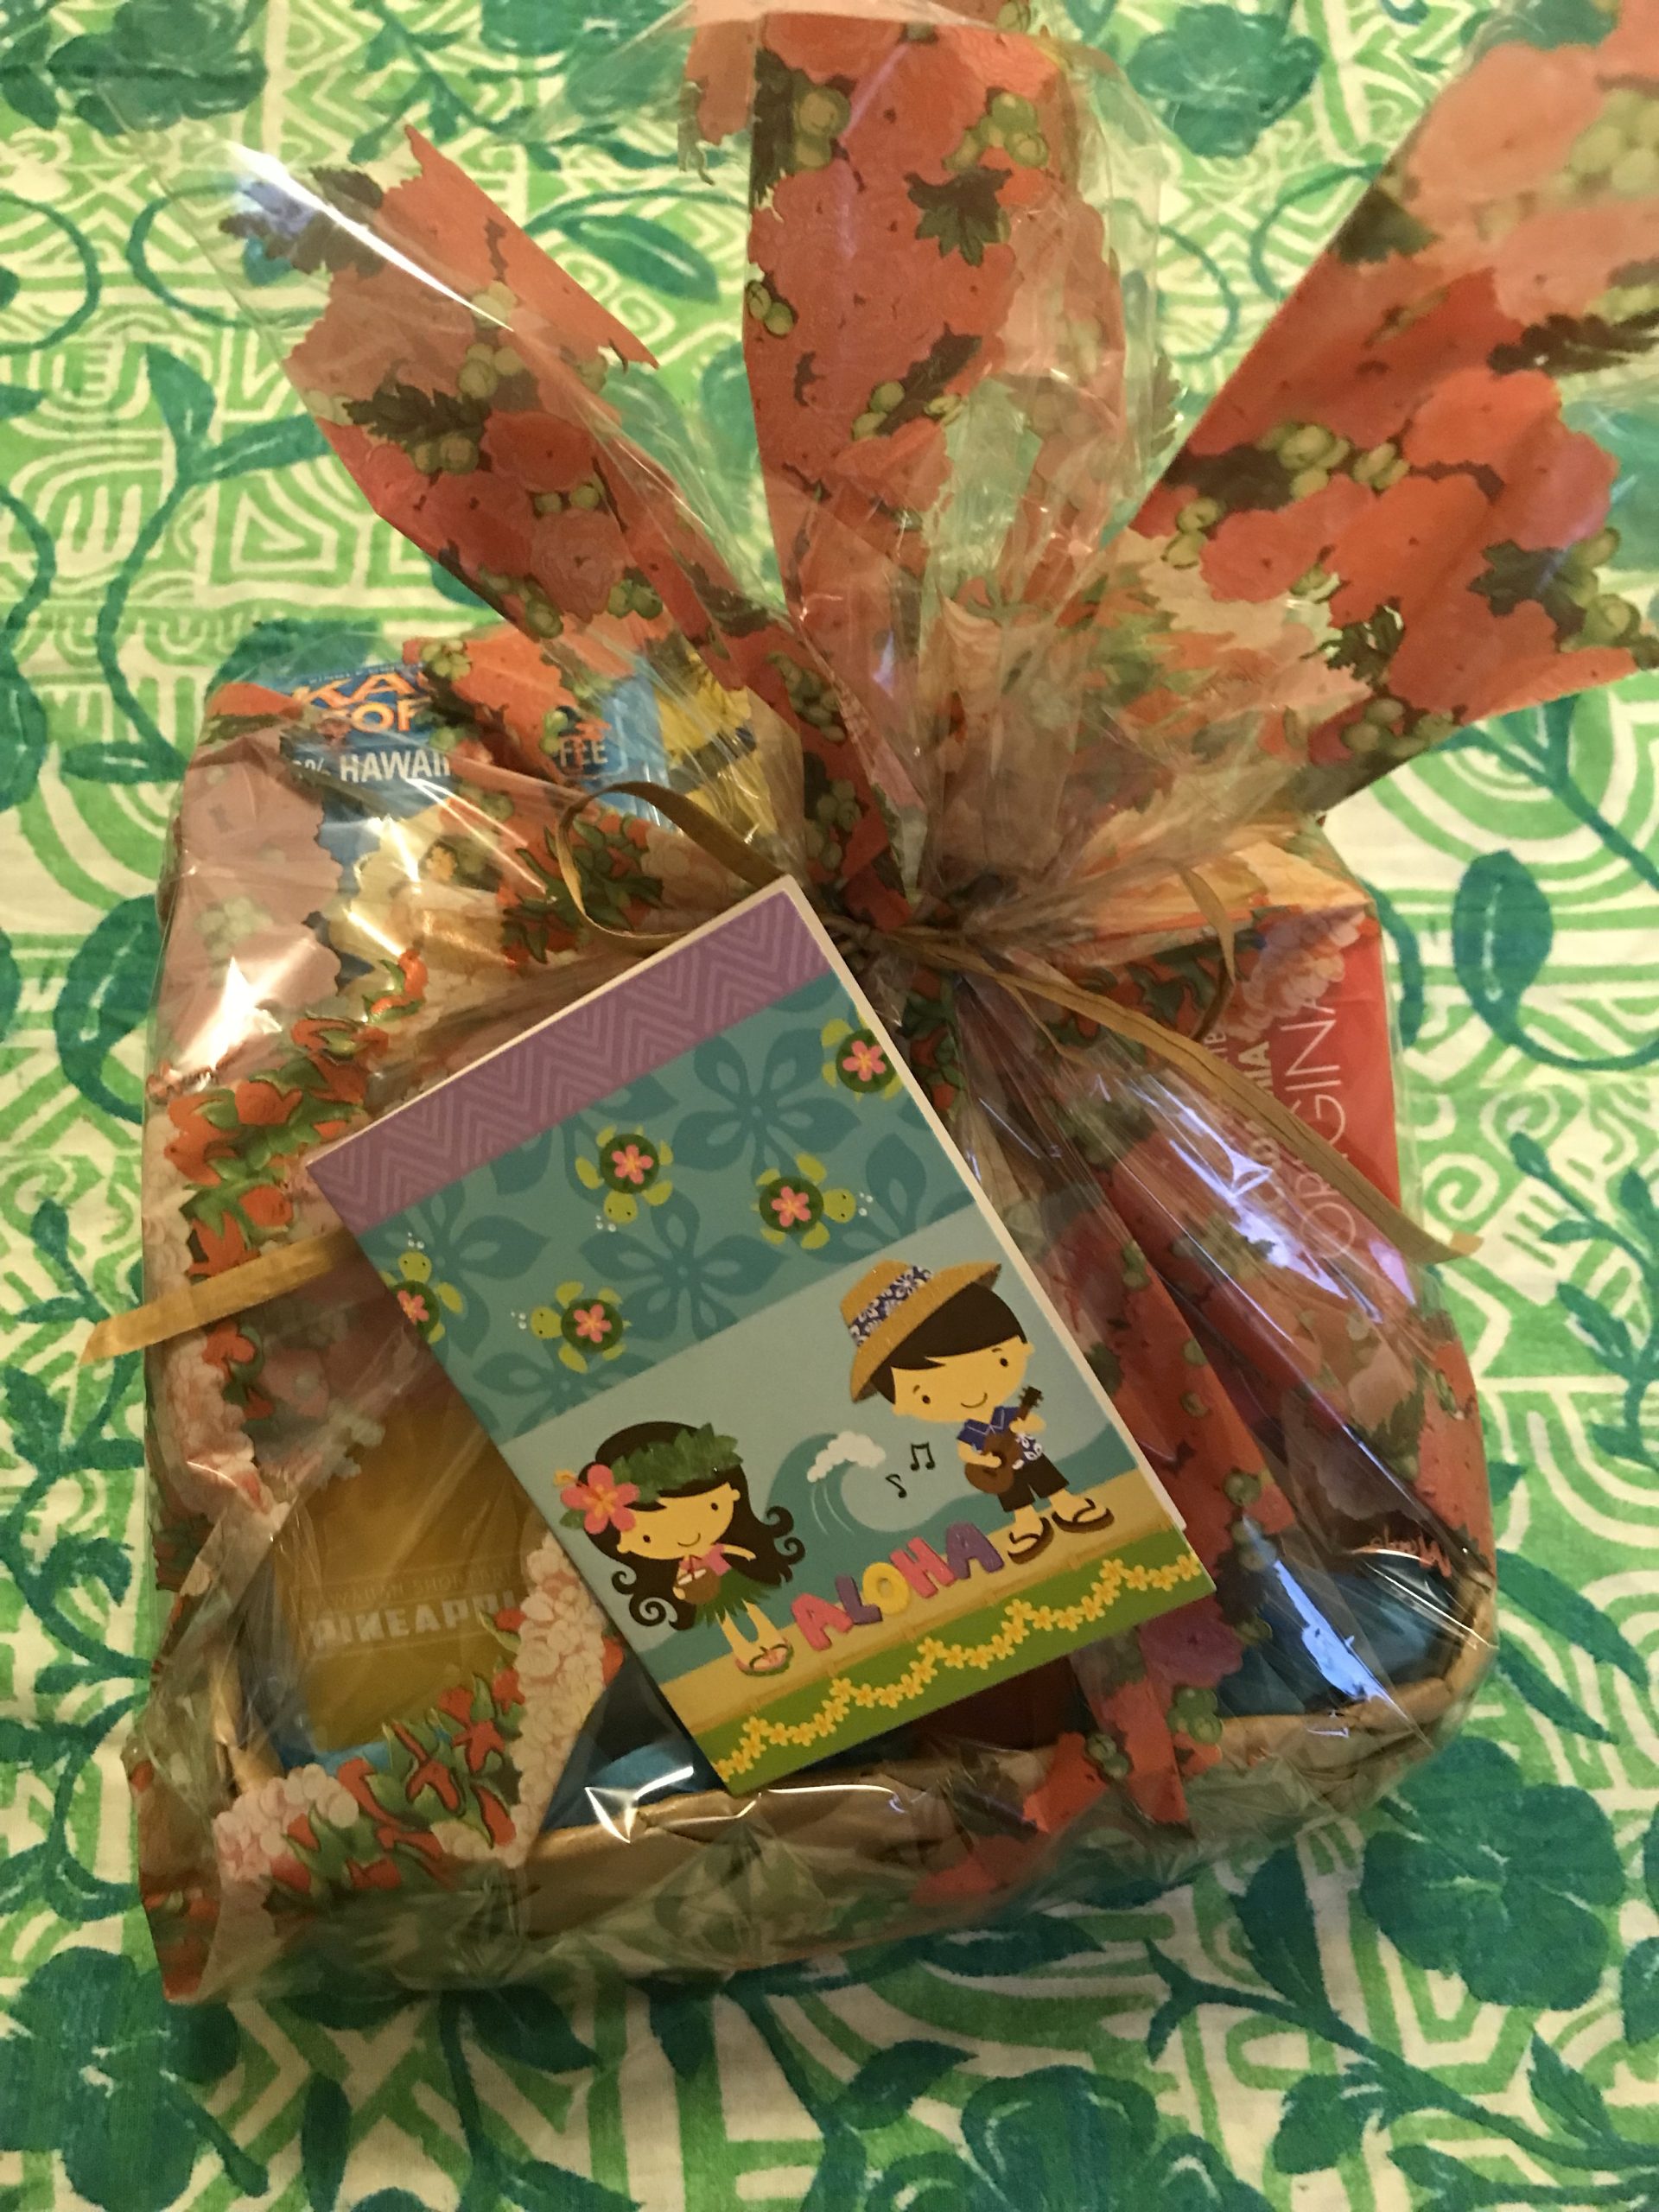 est Hawaii Cookie Snack Food Gift Box Thank You Hawaiian Aloha Snack Food Gift Basket Tropical Treats Perfect Present Idea 710